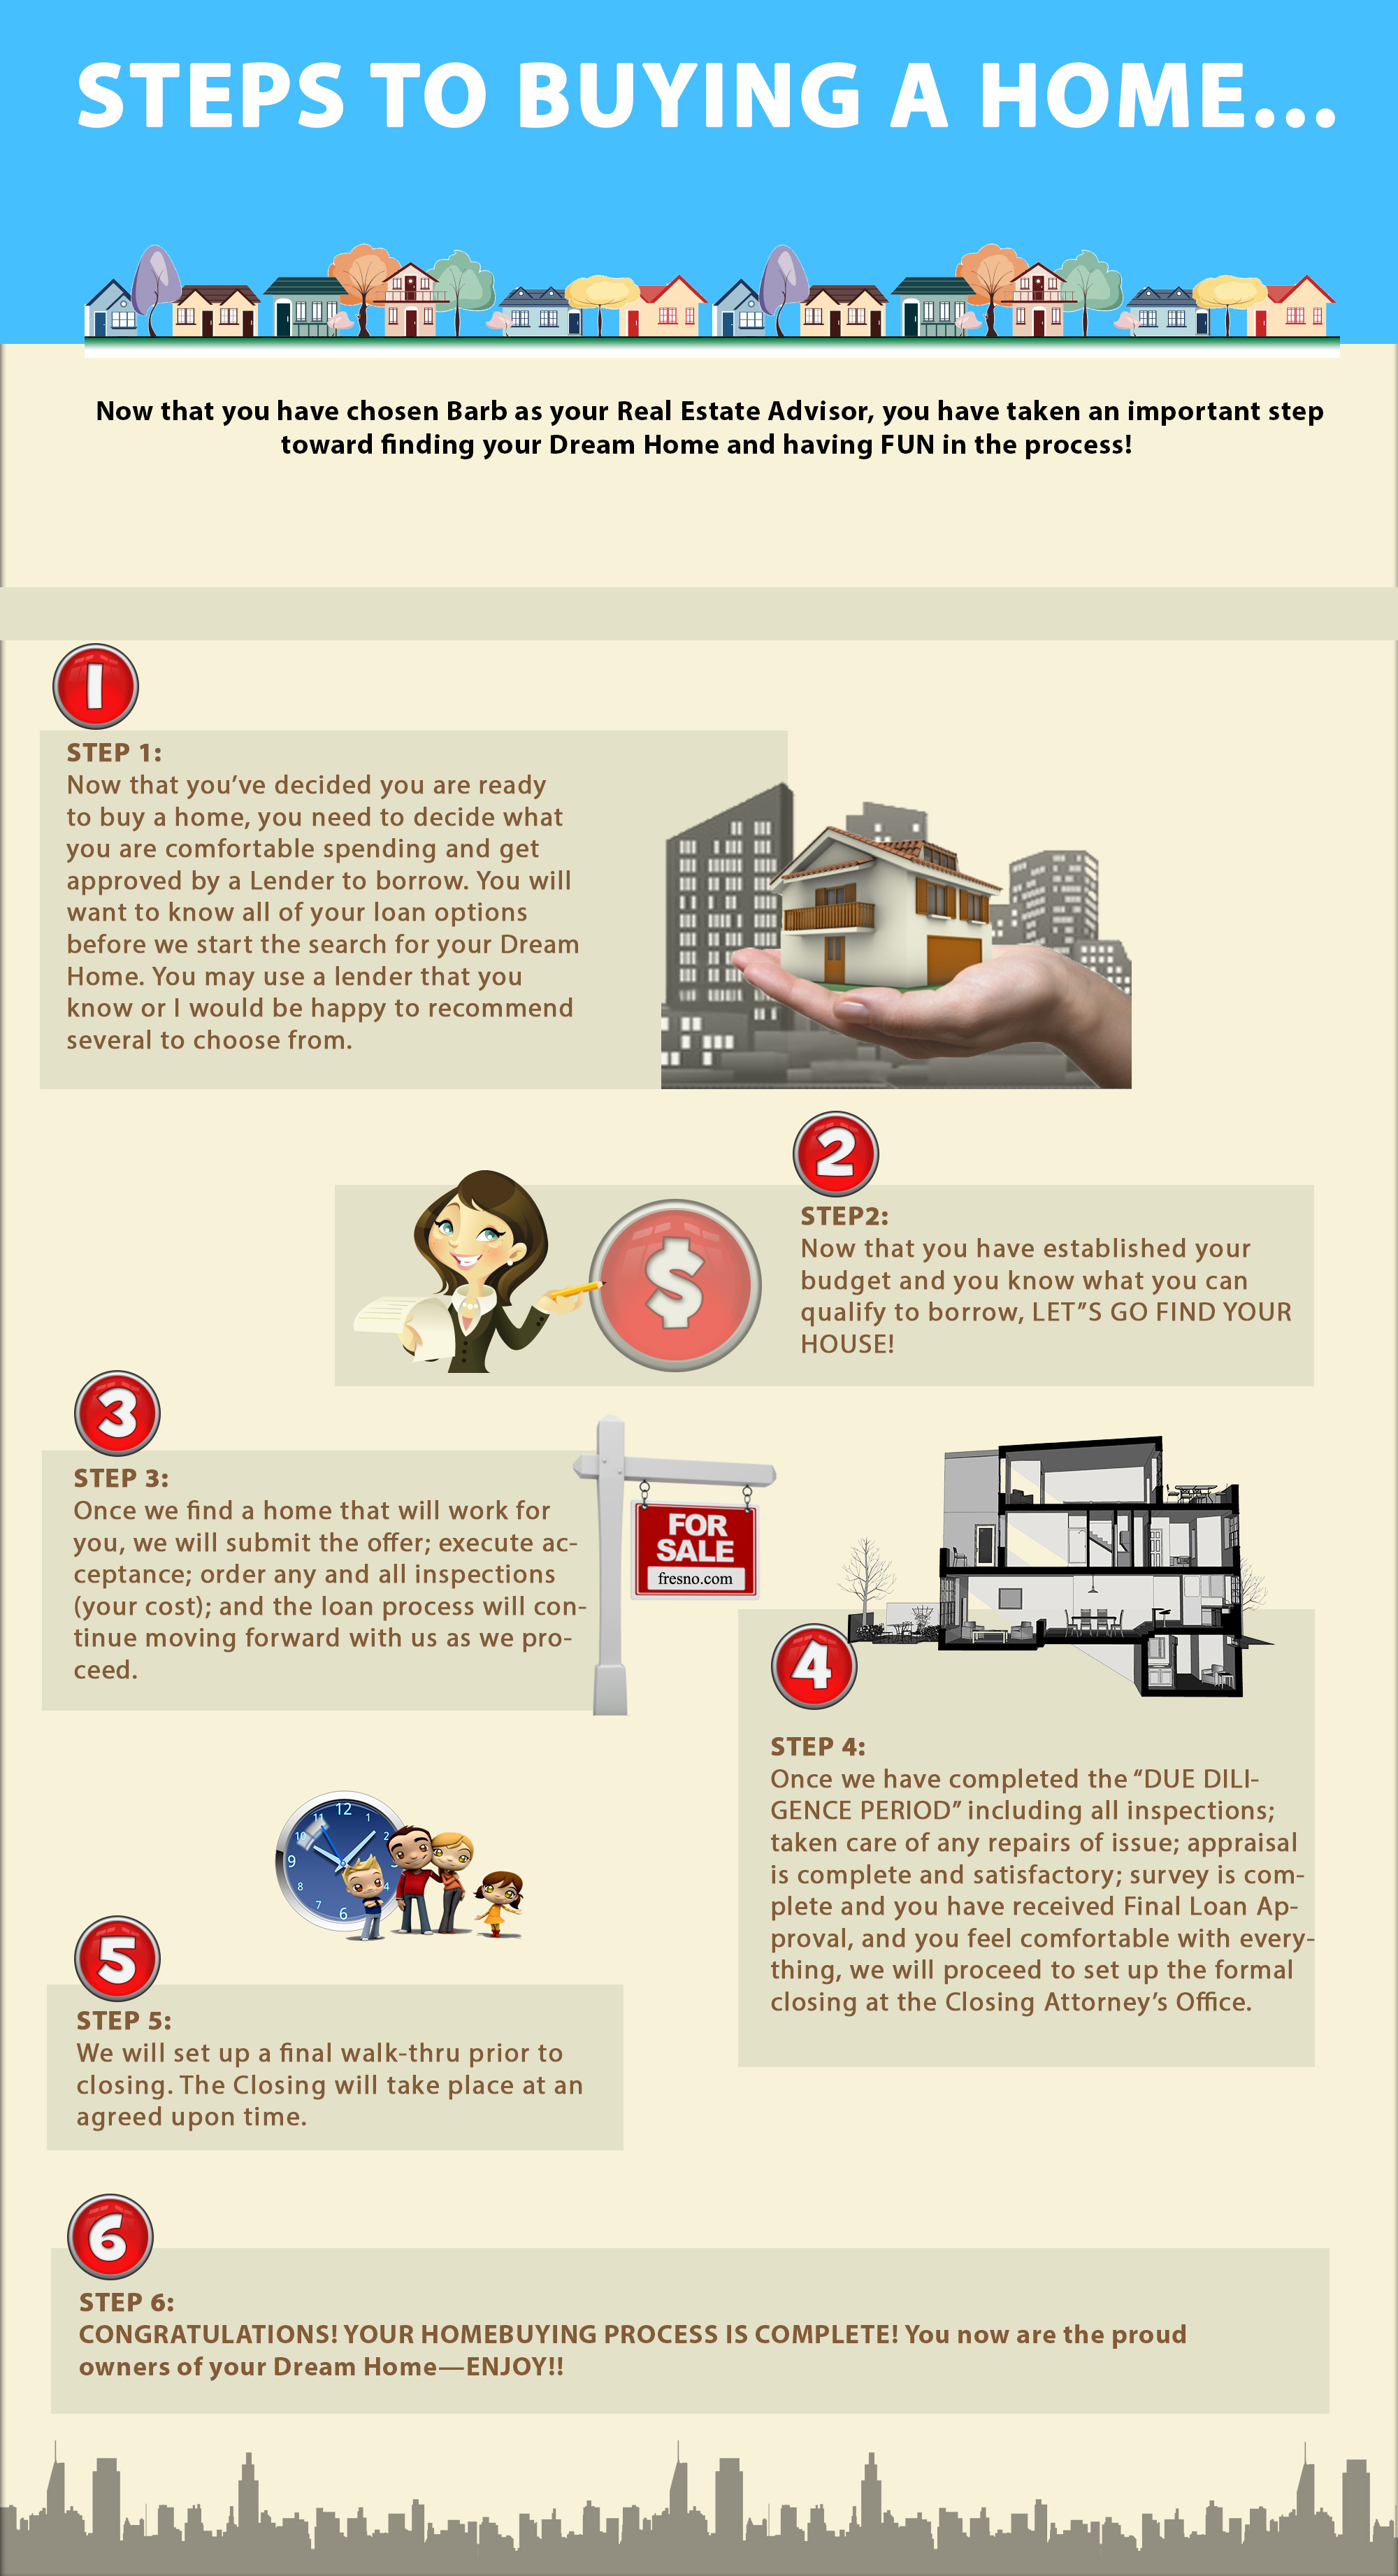 STEPS_TO_BUYING_A_HOME